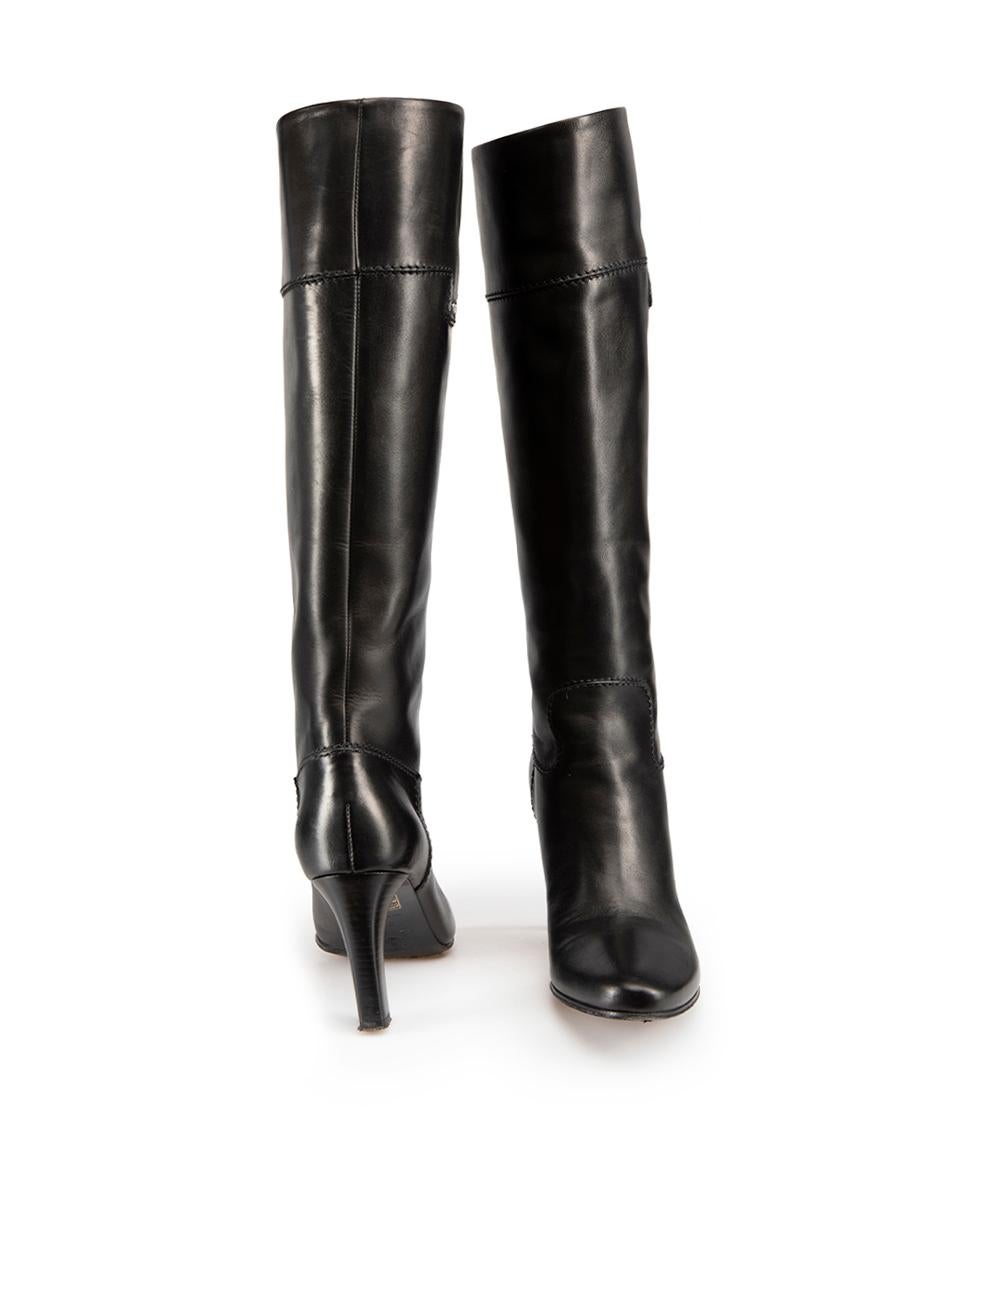 Céline Black Leather Heeled Knee High Boots Size IT 38 In Good Condition For Sale In London, GB